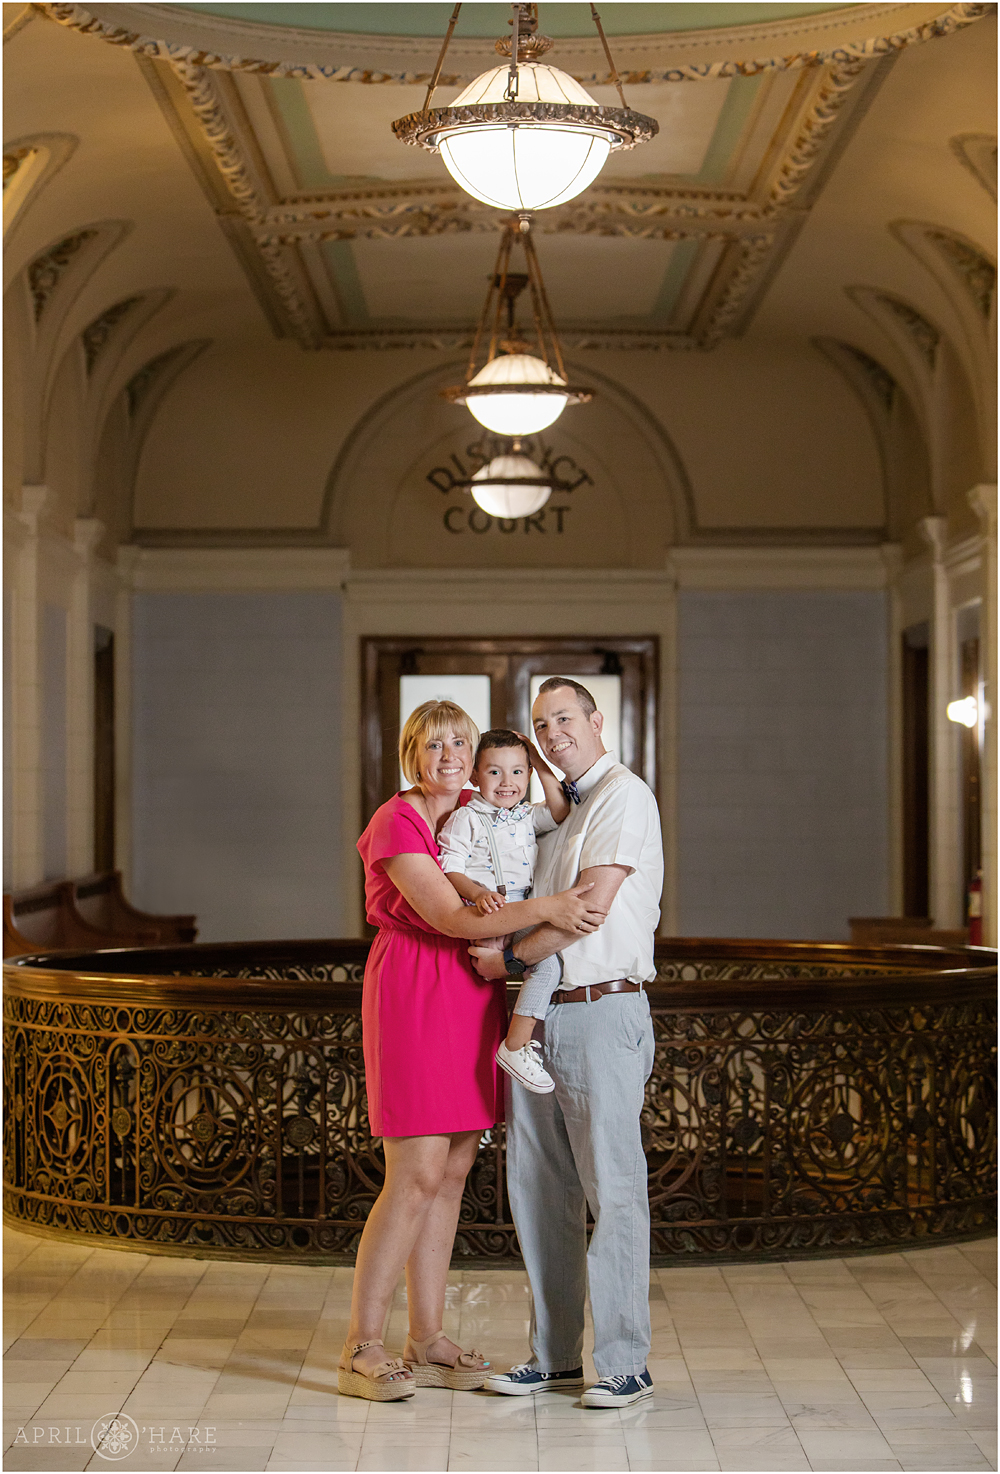 Beautiful family portrait inside the Weld County Court in Greeley Colorado